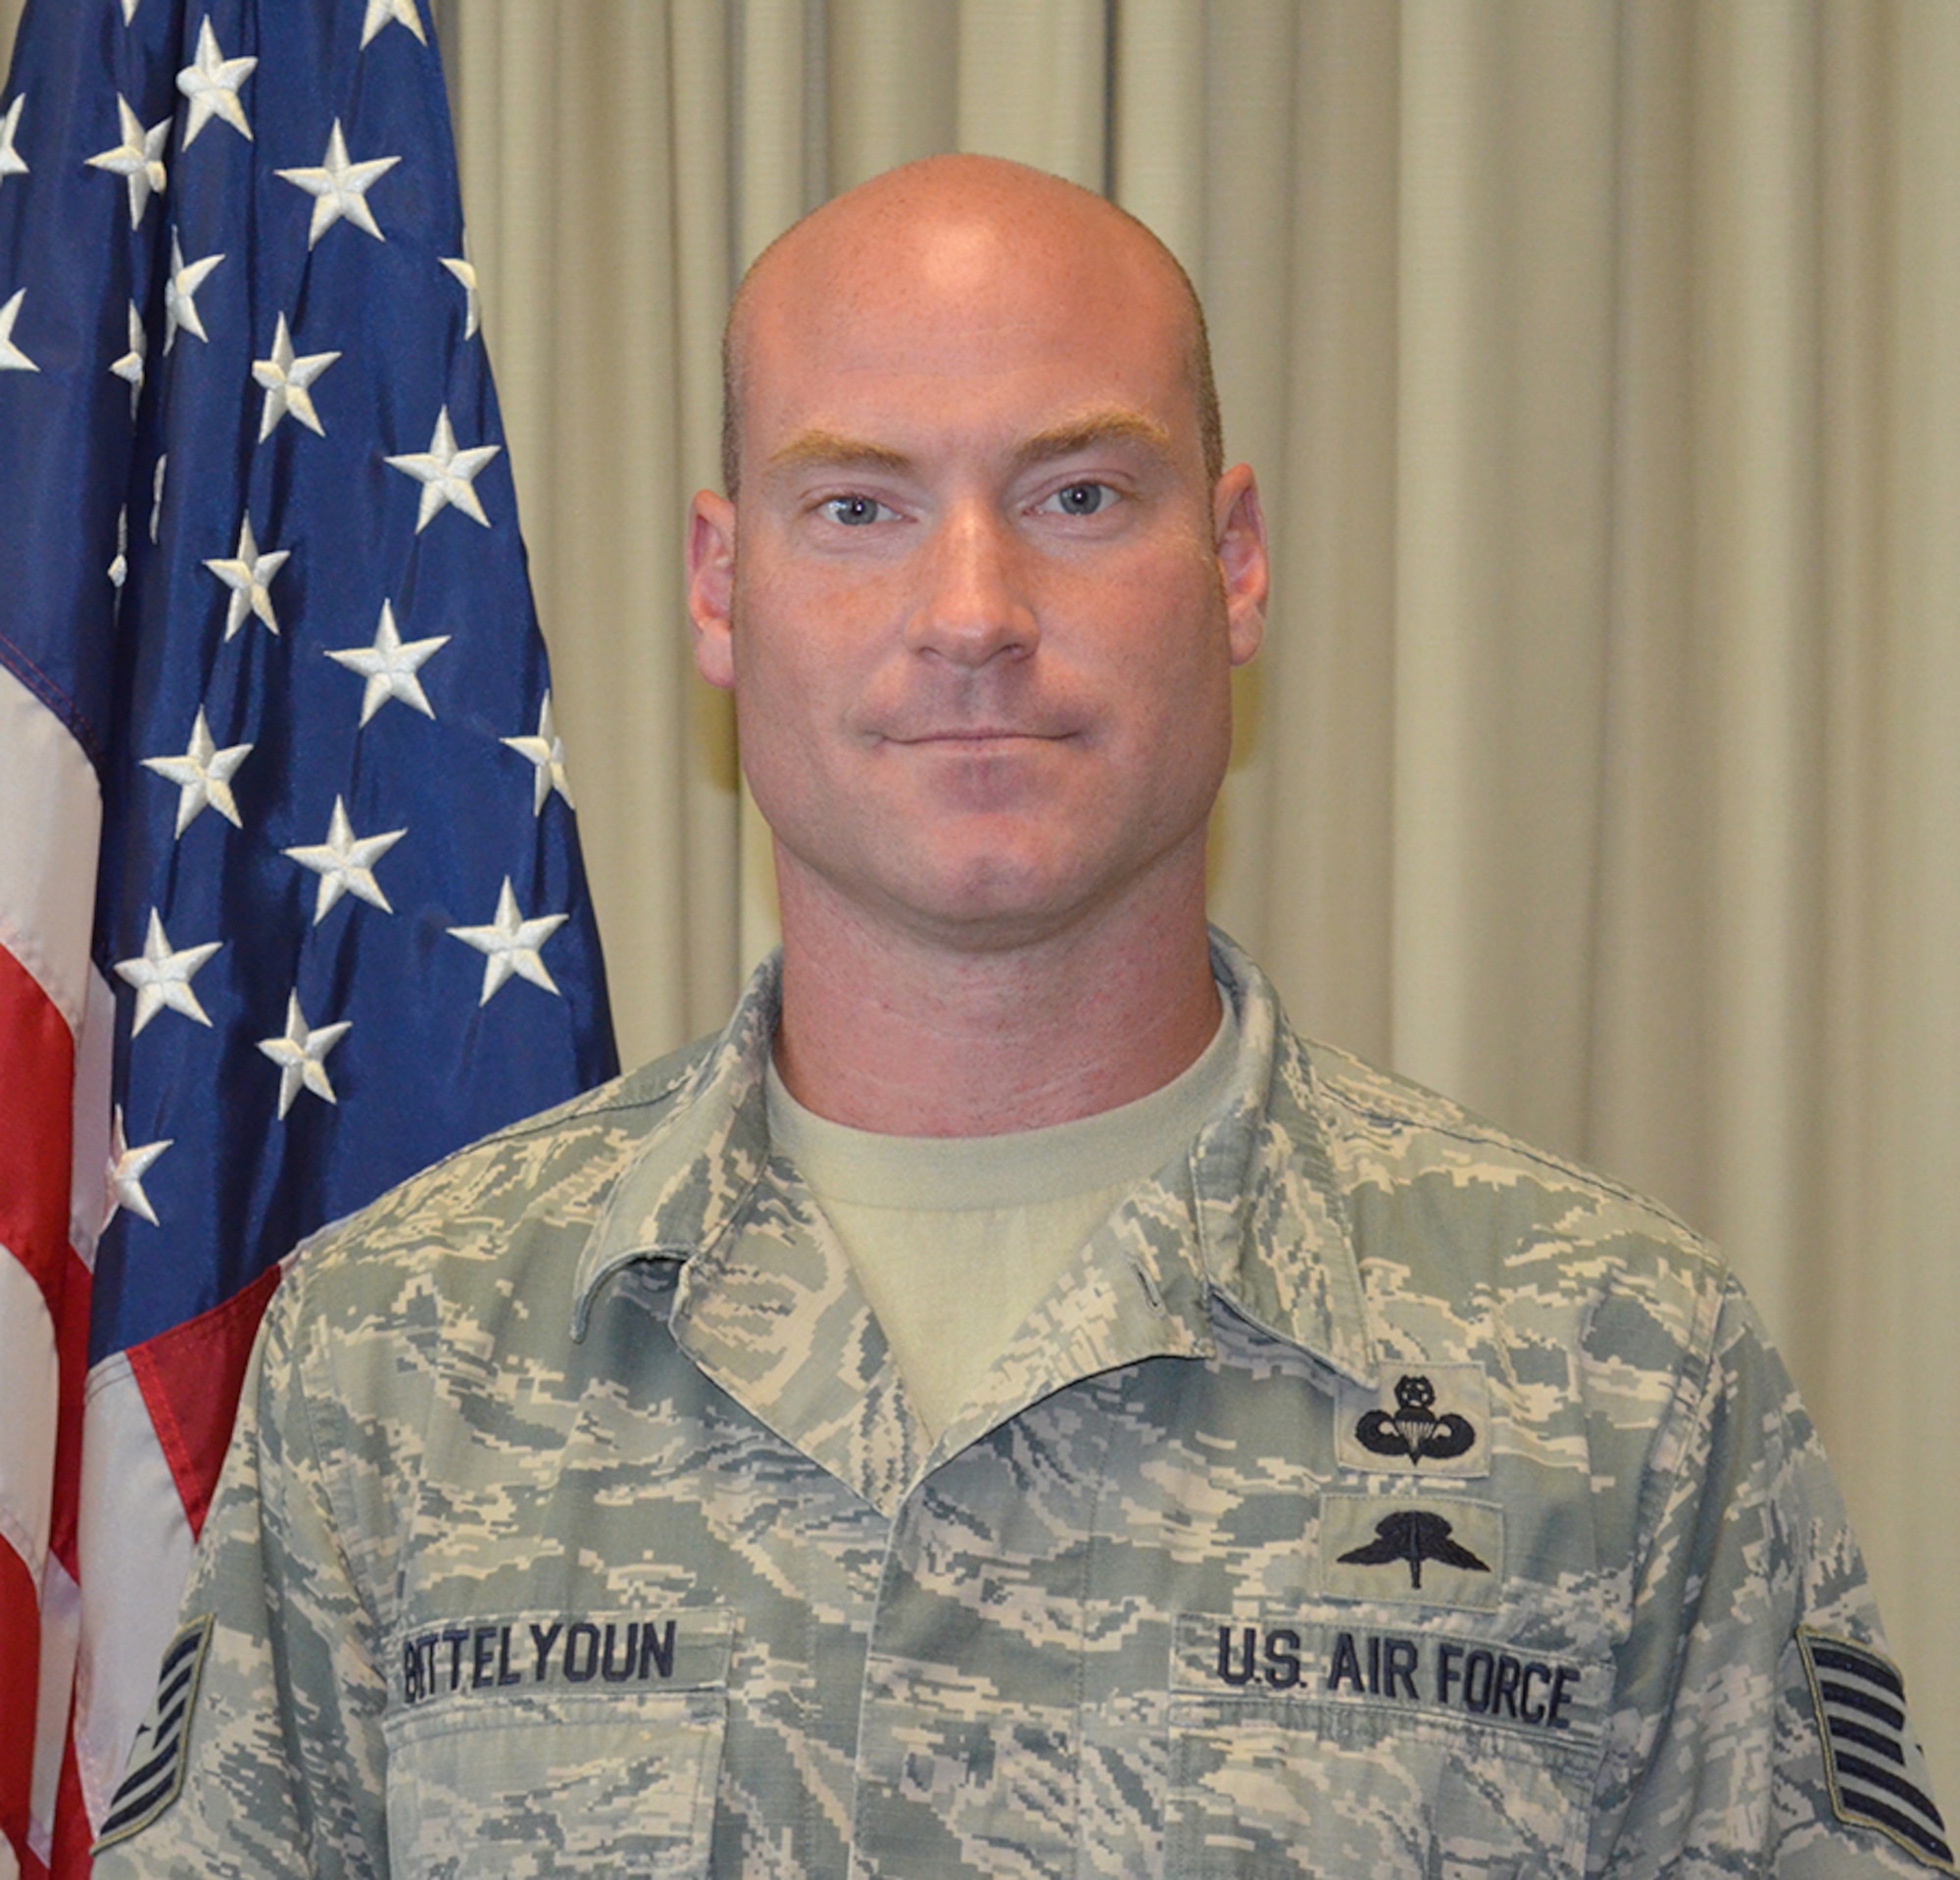 Tech. Sgt. Marty Bettelyoun, a Combat Controller with the 720th Operations Support Squadron, died Aug. 3, 2015, in a military freefall training accident on Eglin Range.